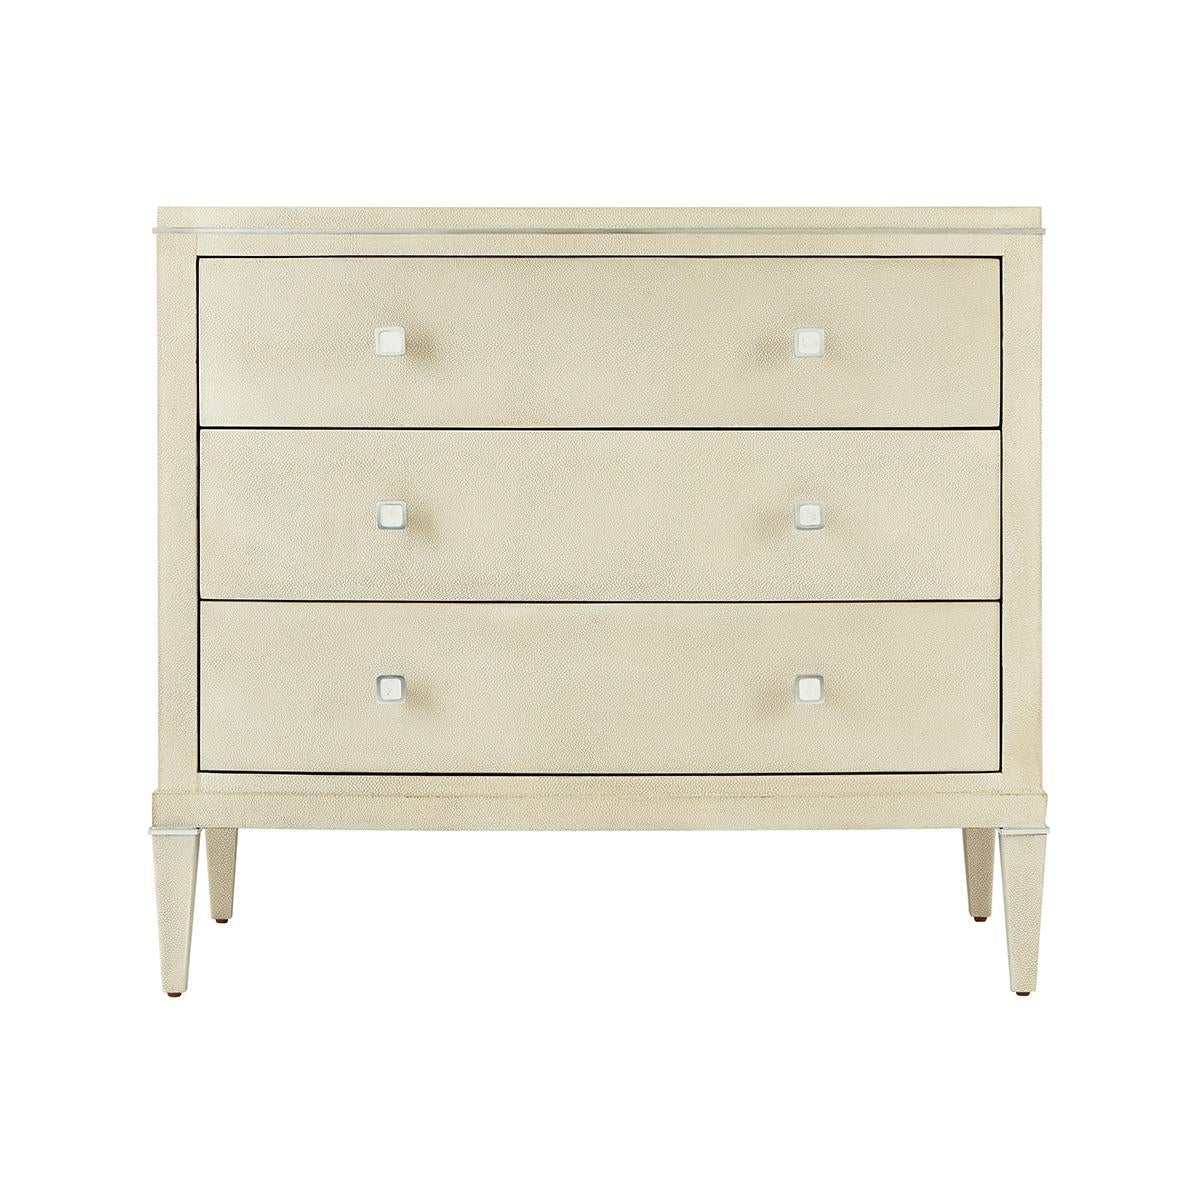 Wrapped in a shagreen embossed leather in our light overcast dove finish, with three long drawers and with polished nickel finish hardware and trim, raised on square tapered legs with nickel collars.

Dimensions: 34